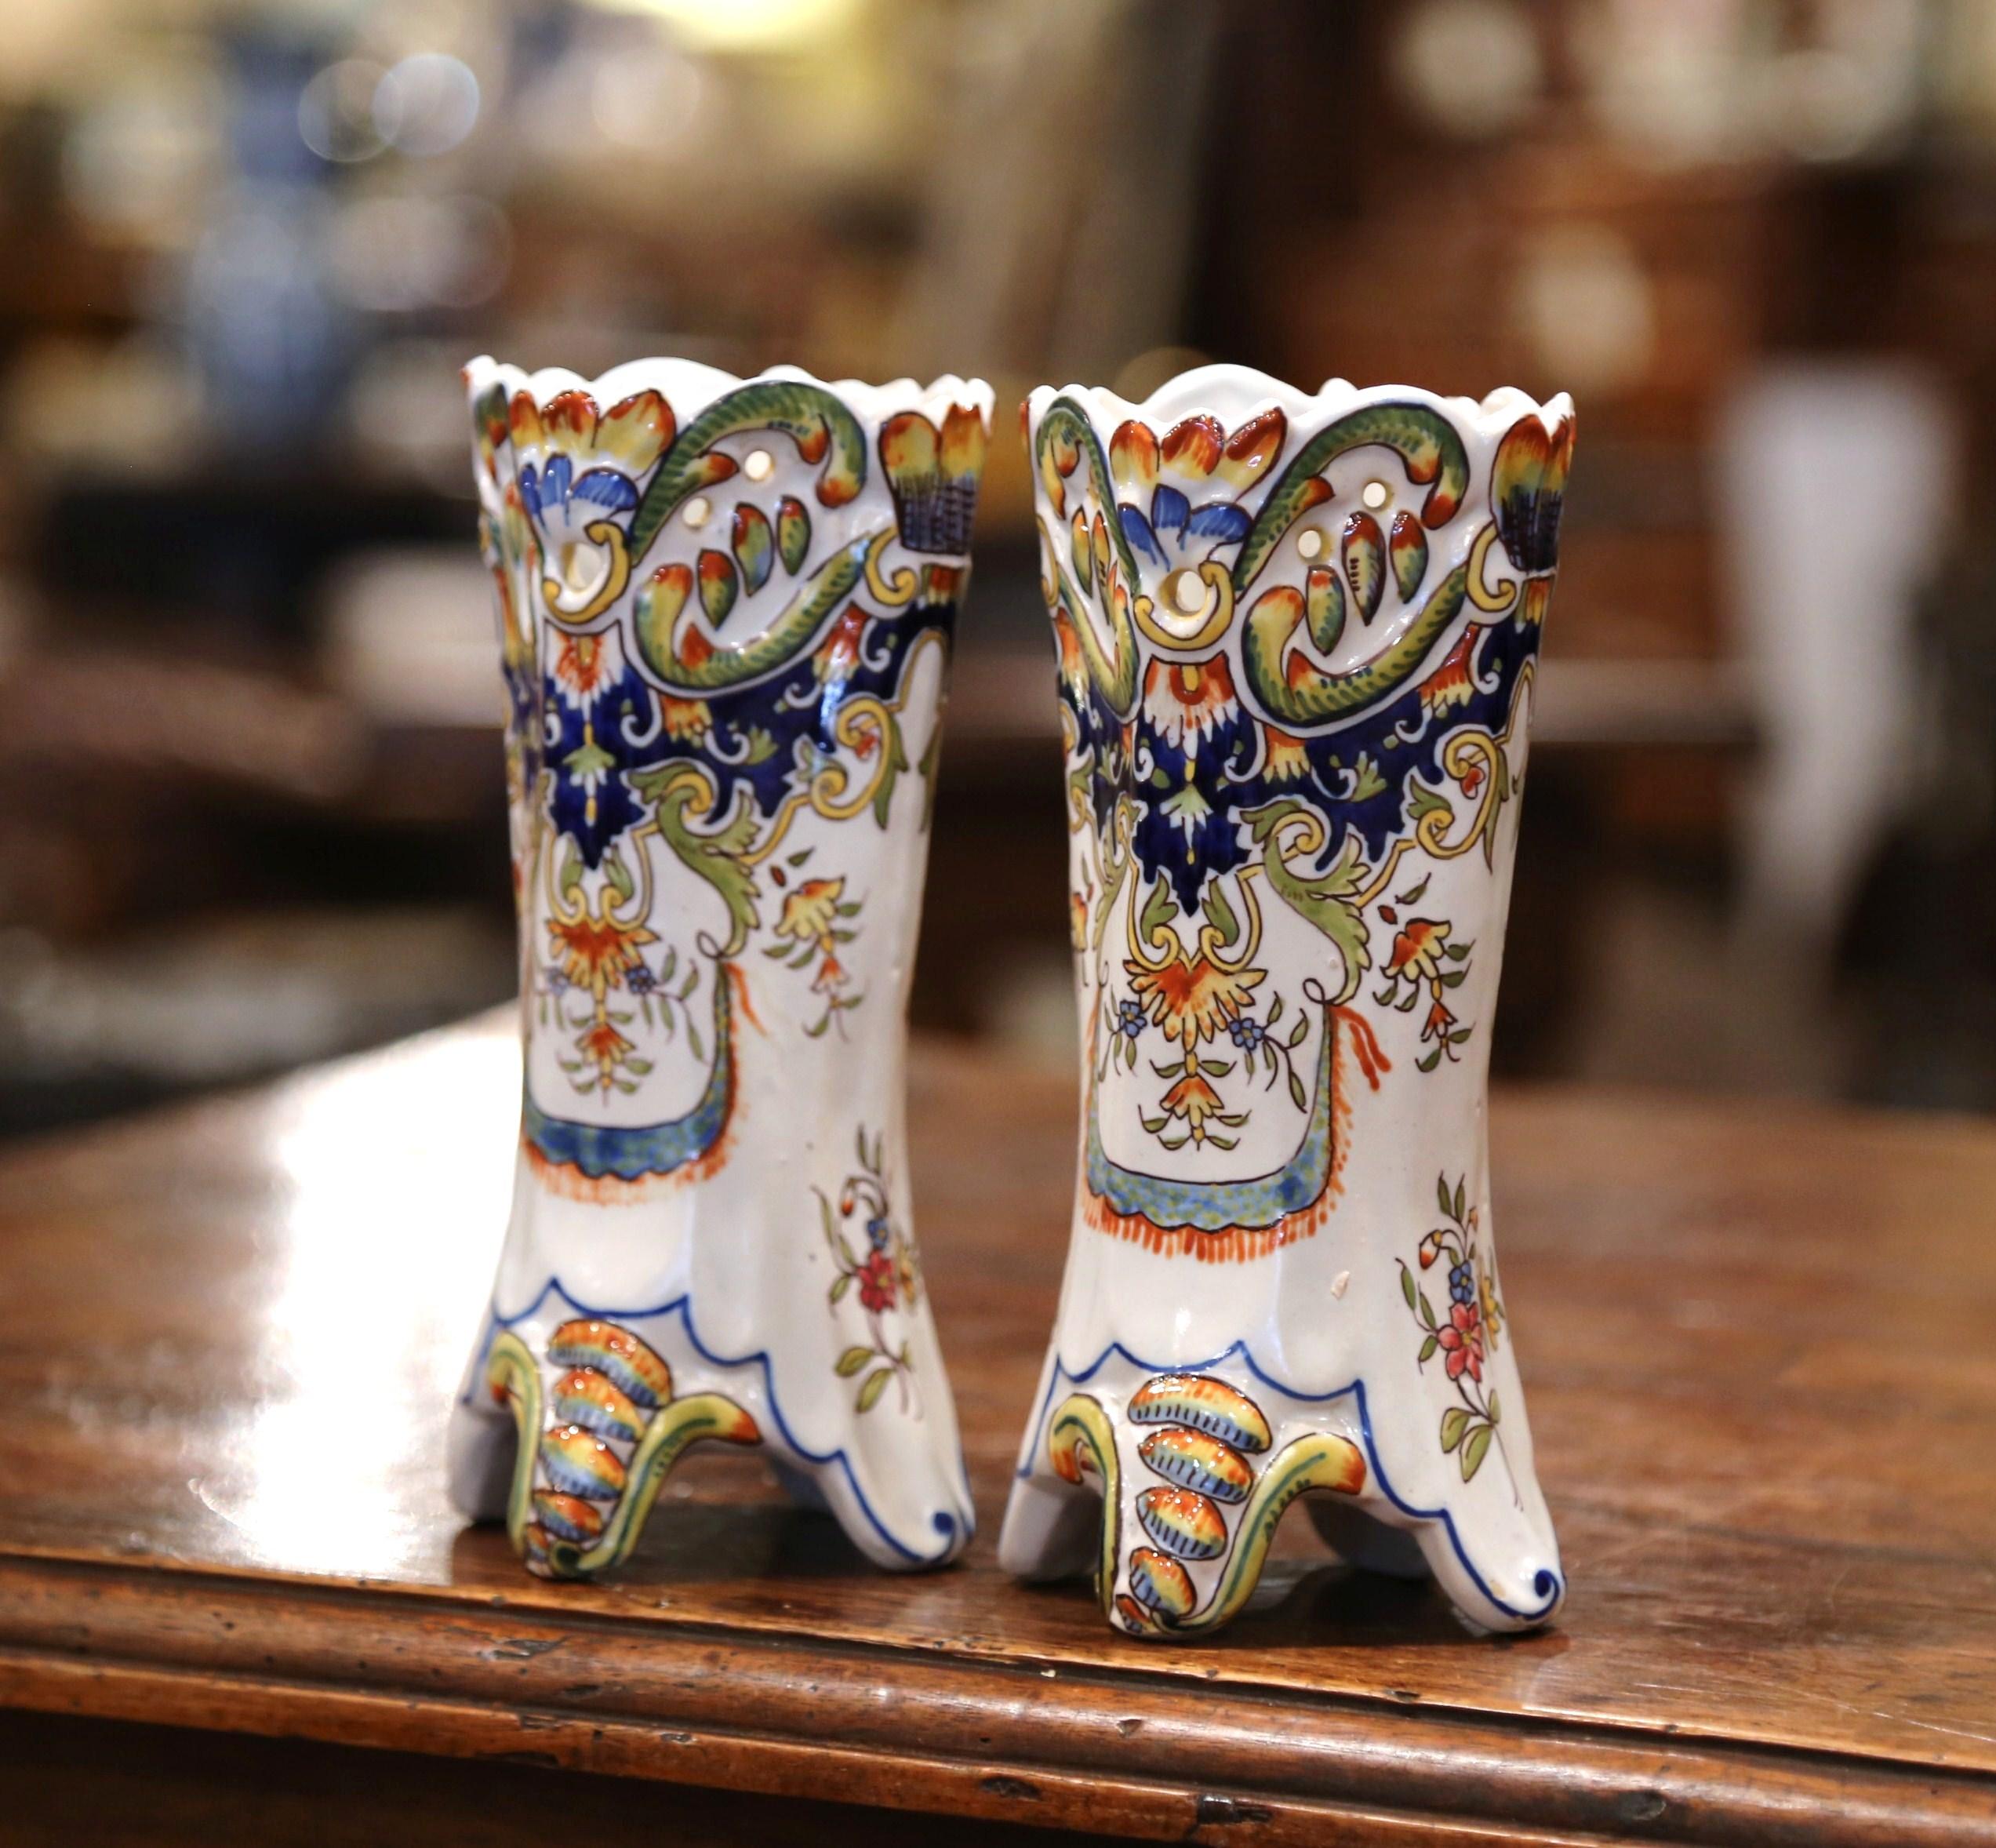 Incorporate beautiful colors into your home with this fine pair of antique ceramic vases from Rouen, France. Crafted circa 1880, the vases are ornate in decoration yet simple in shape. The small, colorful vases sit on four small feet and feature a